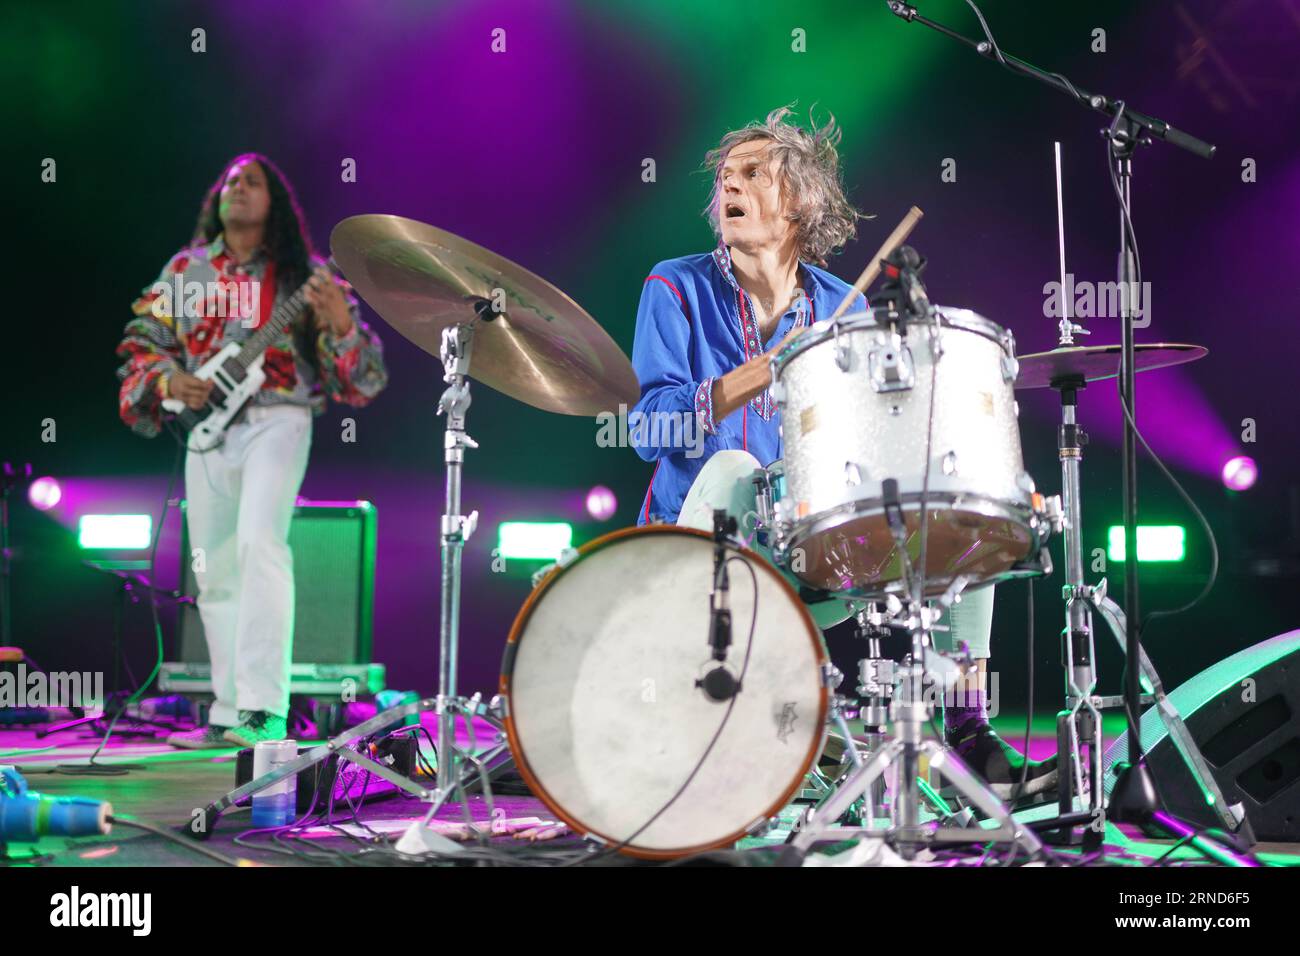 Dorset, UK. Thursday, 31 August, 2023. Greg Saunier of Deerhoof performing at the 2023 edition of the End of the Road festival at Larmer Tree Gardens in Dorset. Photo date: Thursday, August 31, 2023. Photo credit should read: Richard Gray/Alamy Live News Stock Photo